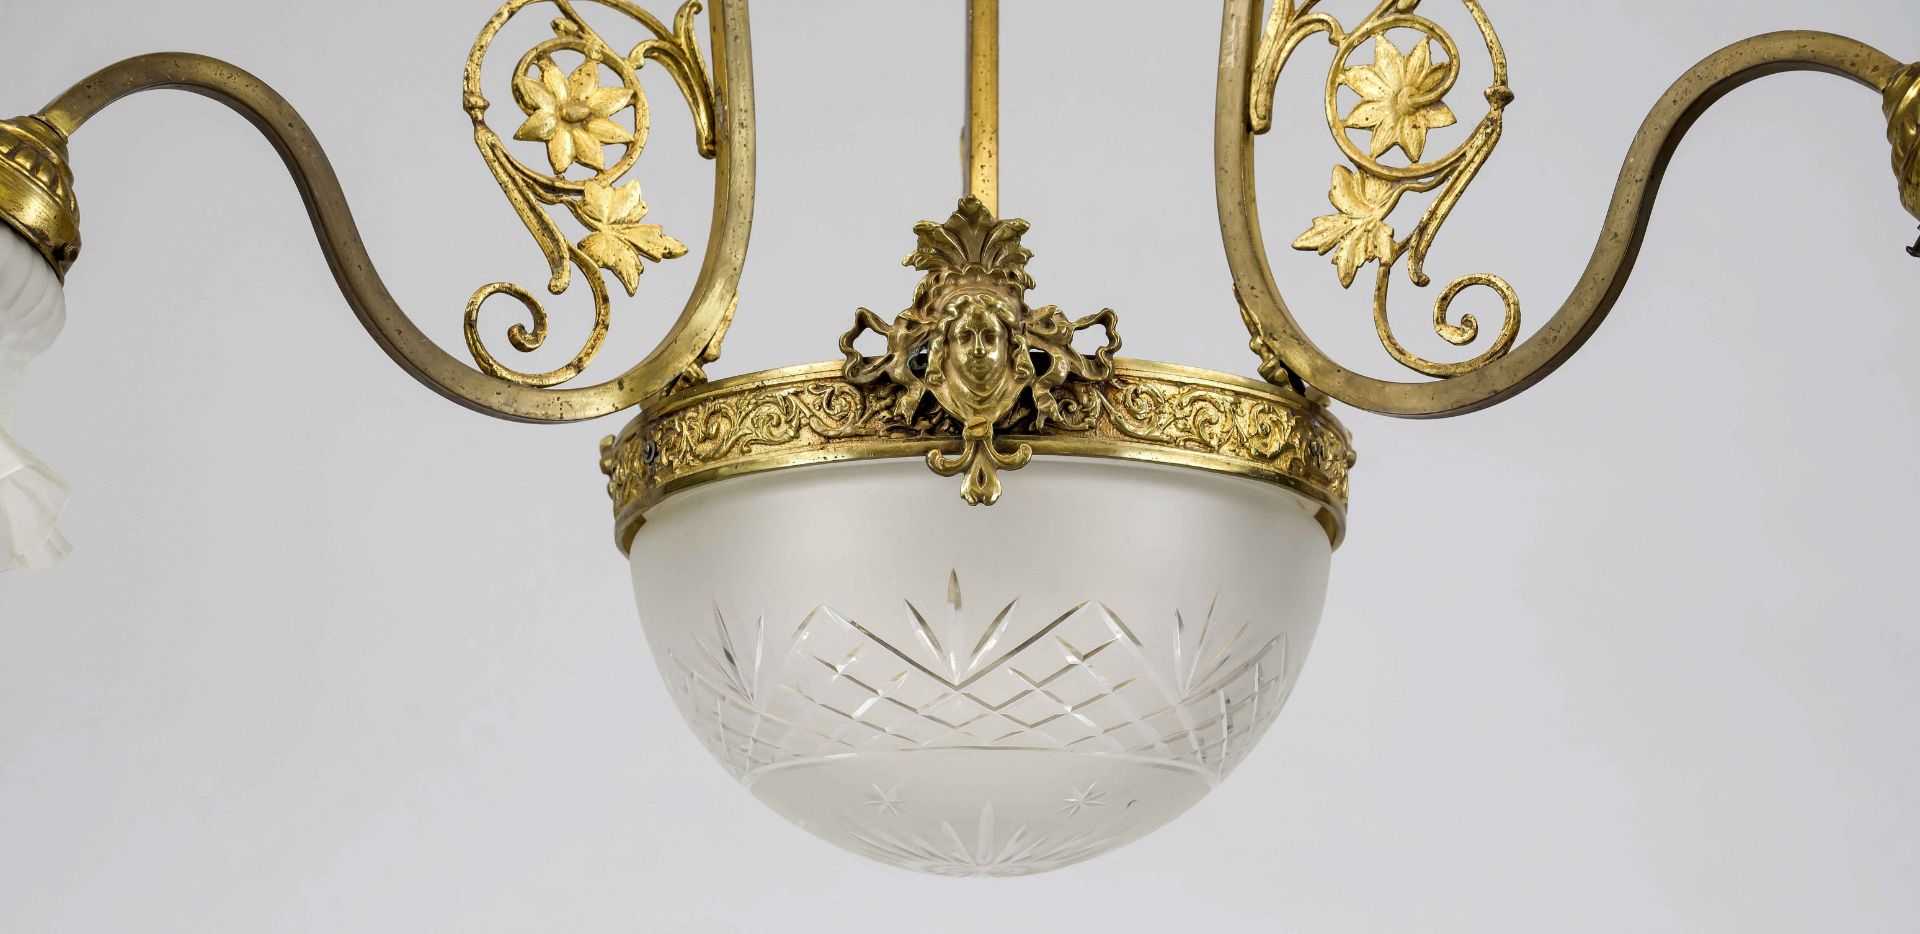 Ceiling lamp, late 19th century Ornamented brass wreath with residual gilding on a three-pass - Image 3 of 3